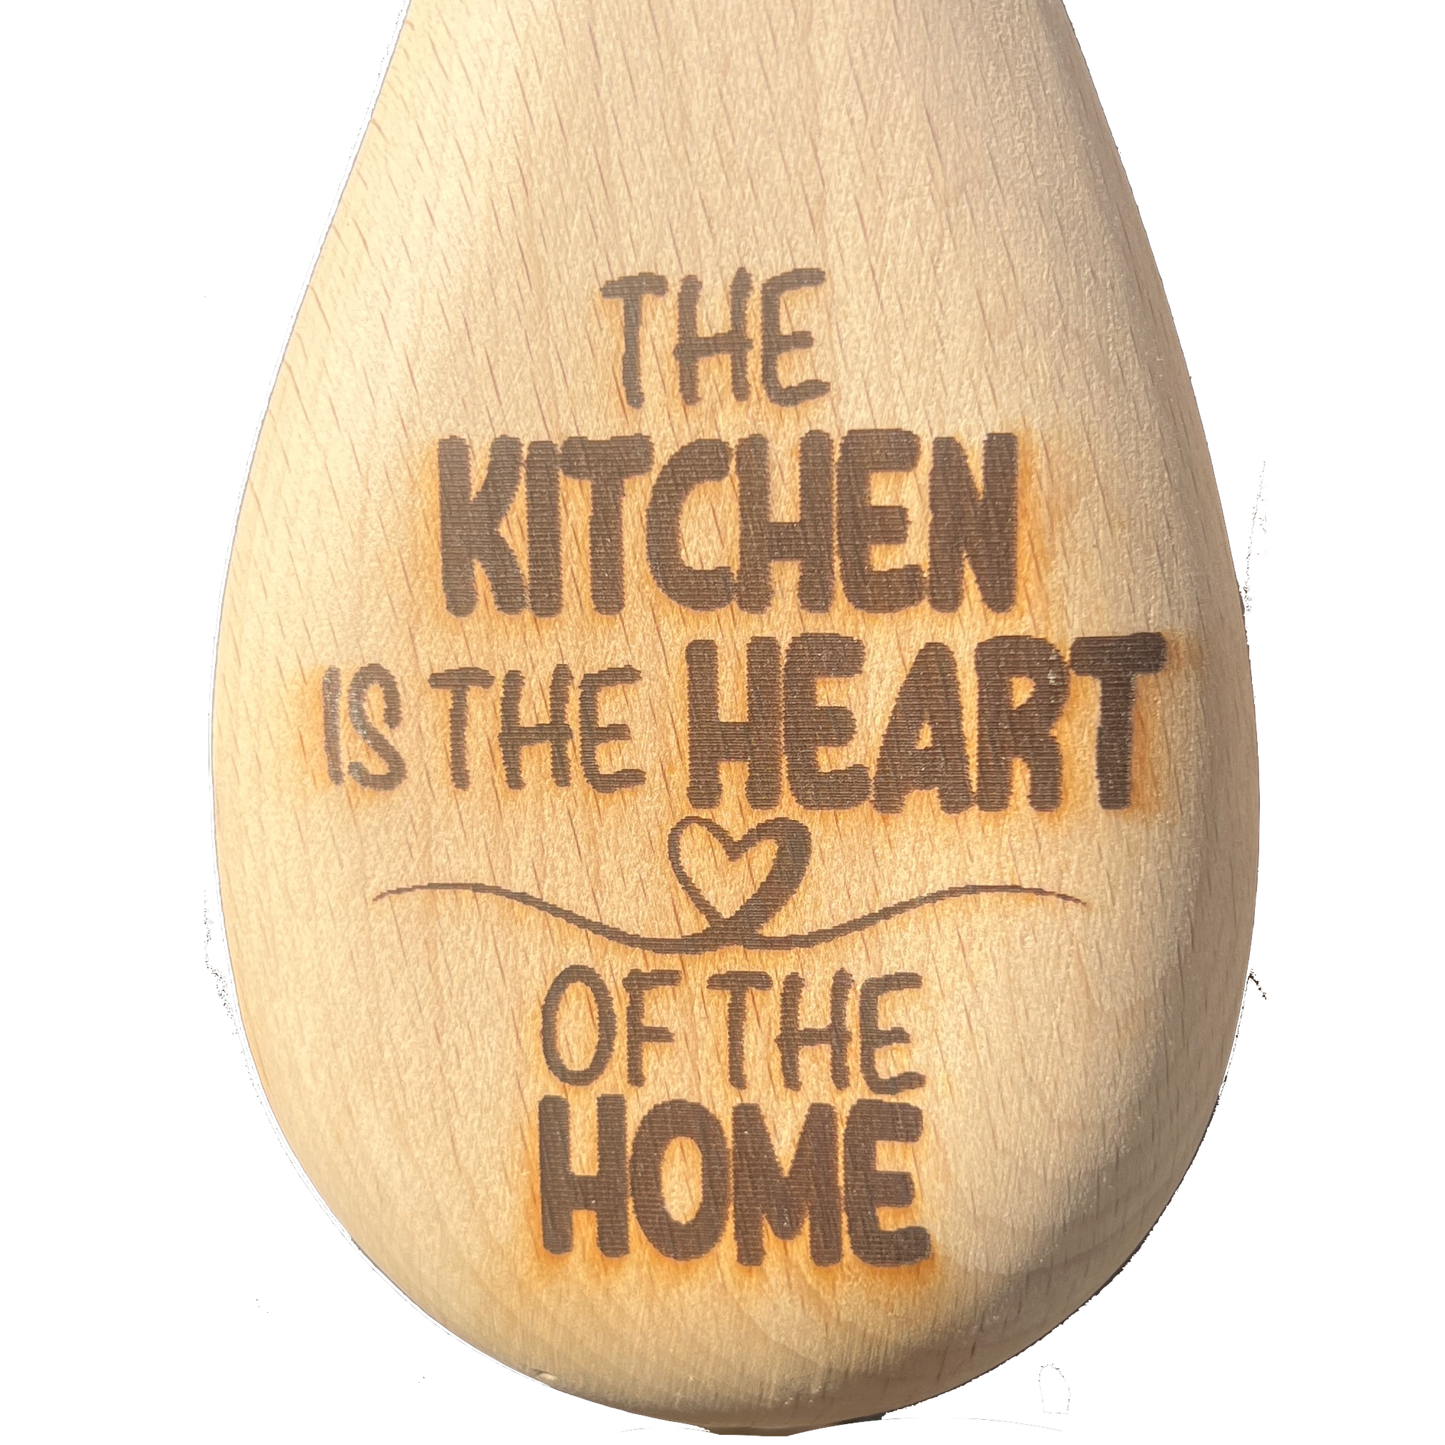 The Kitchen is the Heart of the Home - Spoon